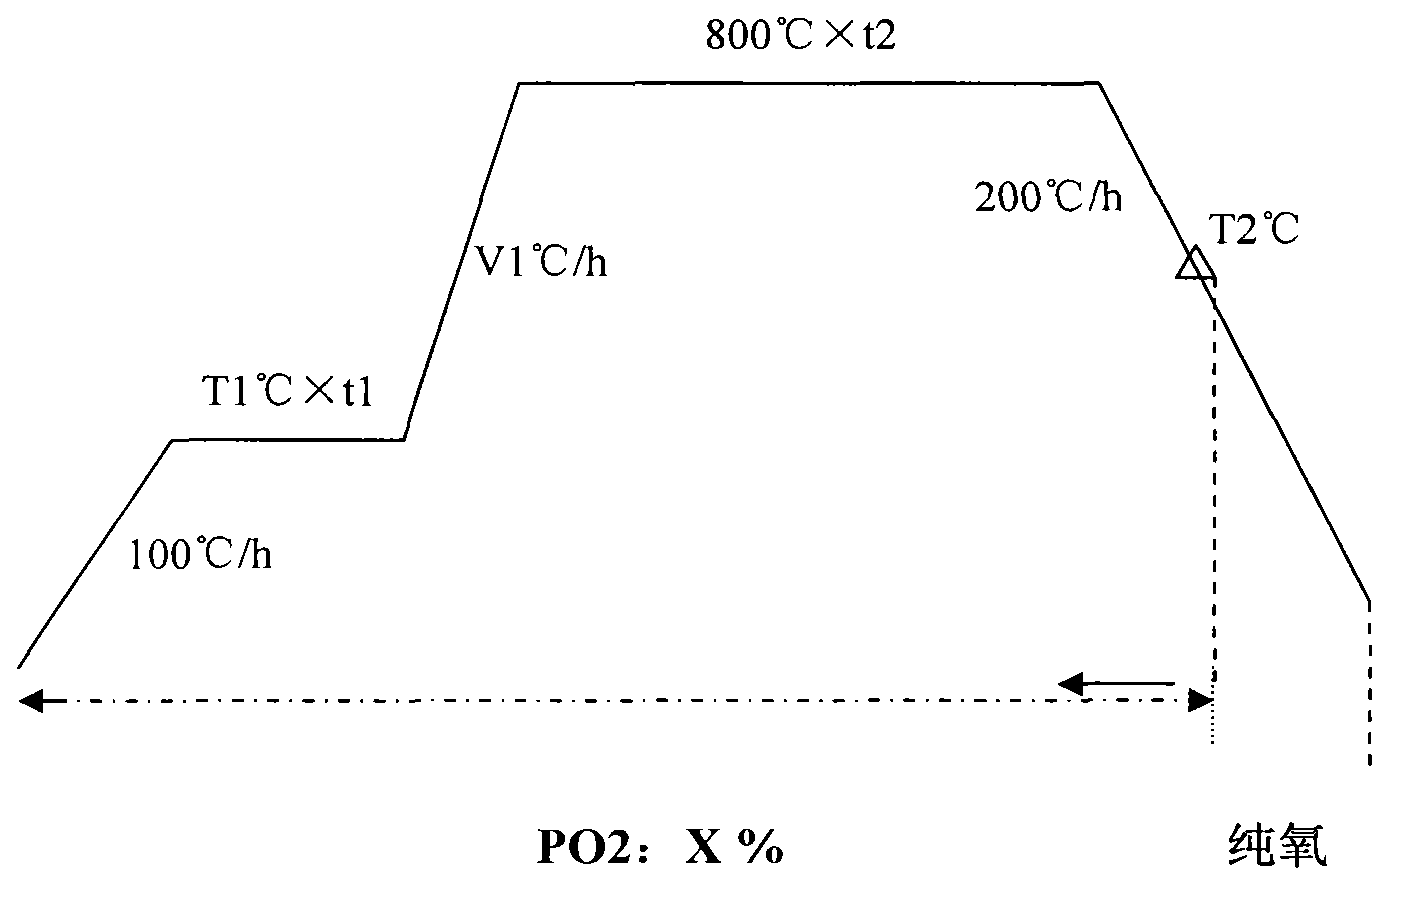 A sintering method for an oxide superconducting powder rod and a method for preparing a superconducting wire rod by using the powder rod sintered by using the sintering method